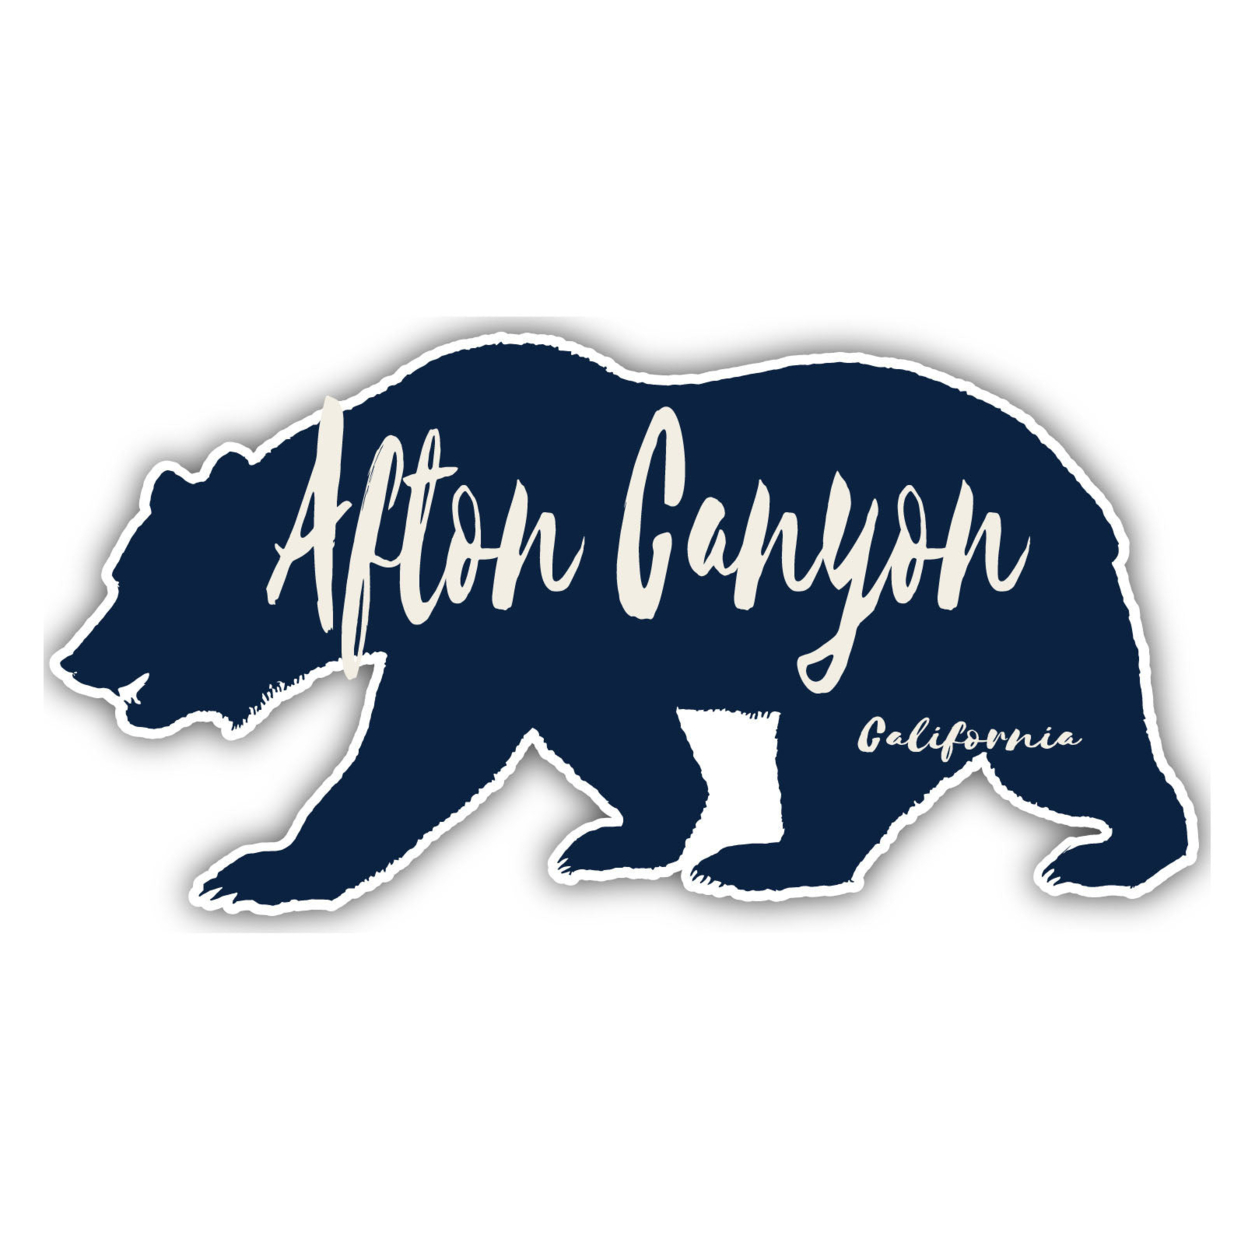 Afton Canyon California Souvenir Decorative Stickers (Choose Theme And Size) - 4-Pack, 2-Inch, Bear